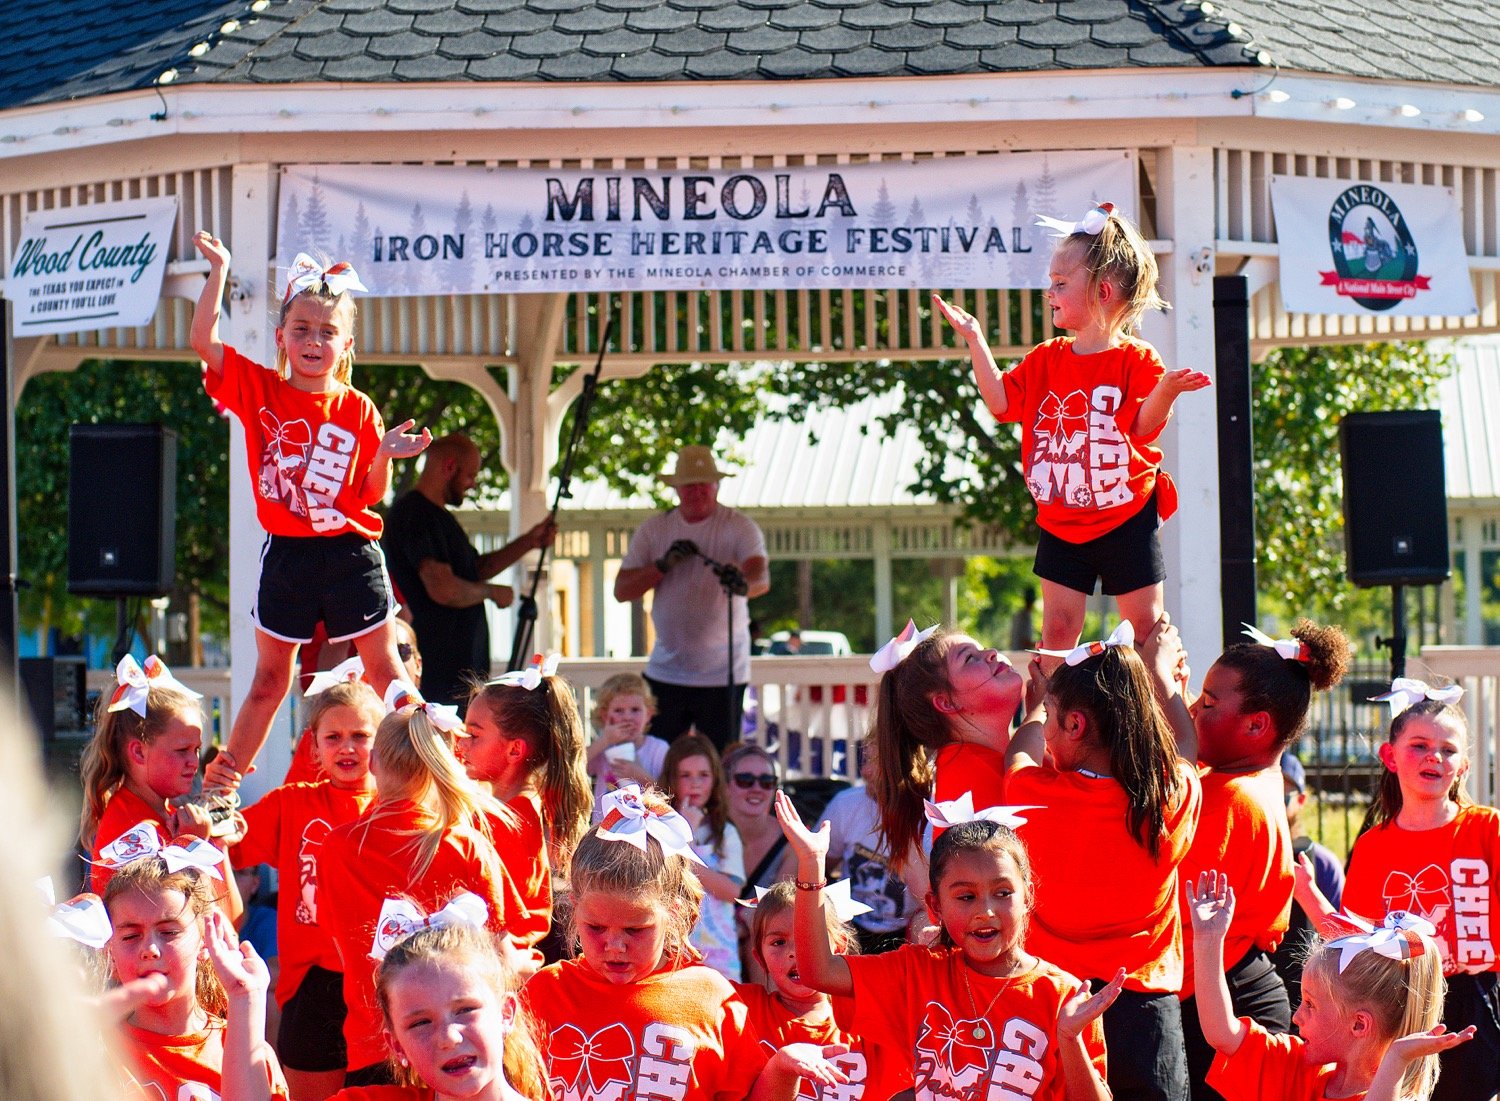 Students from Mineola Cheer Academy perform Saturday afternoon in downtown Mineola. [additional iron horse images available]